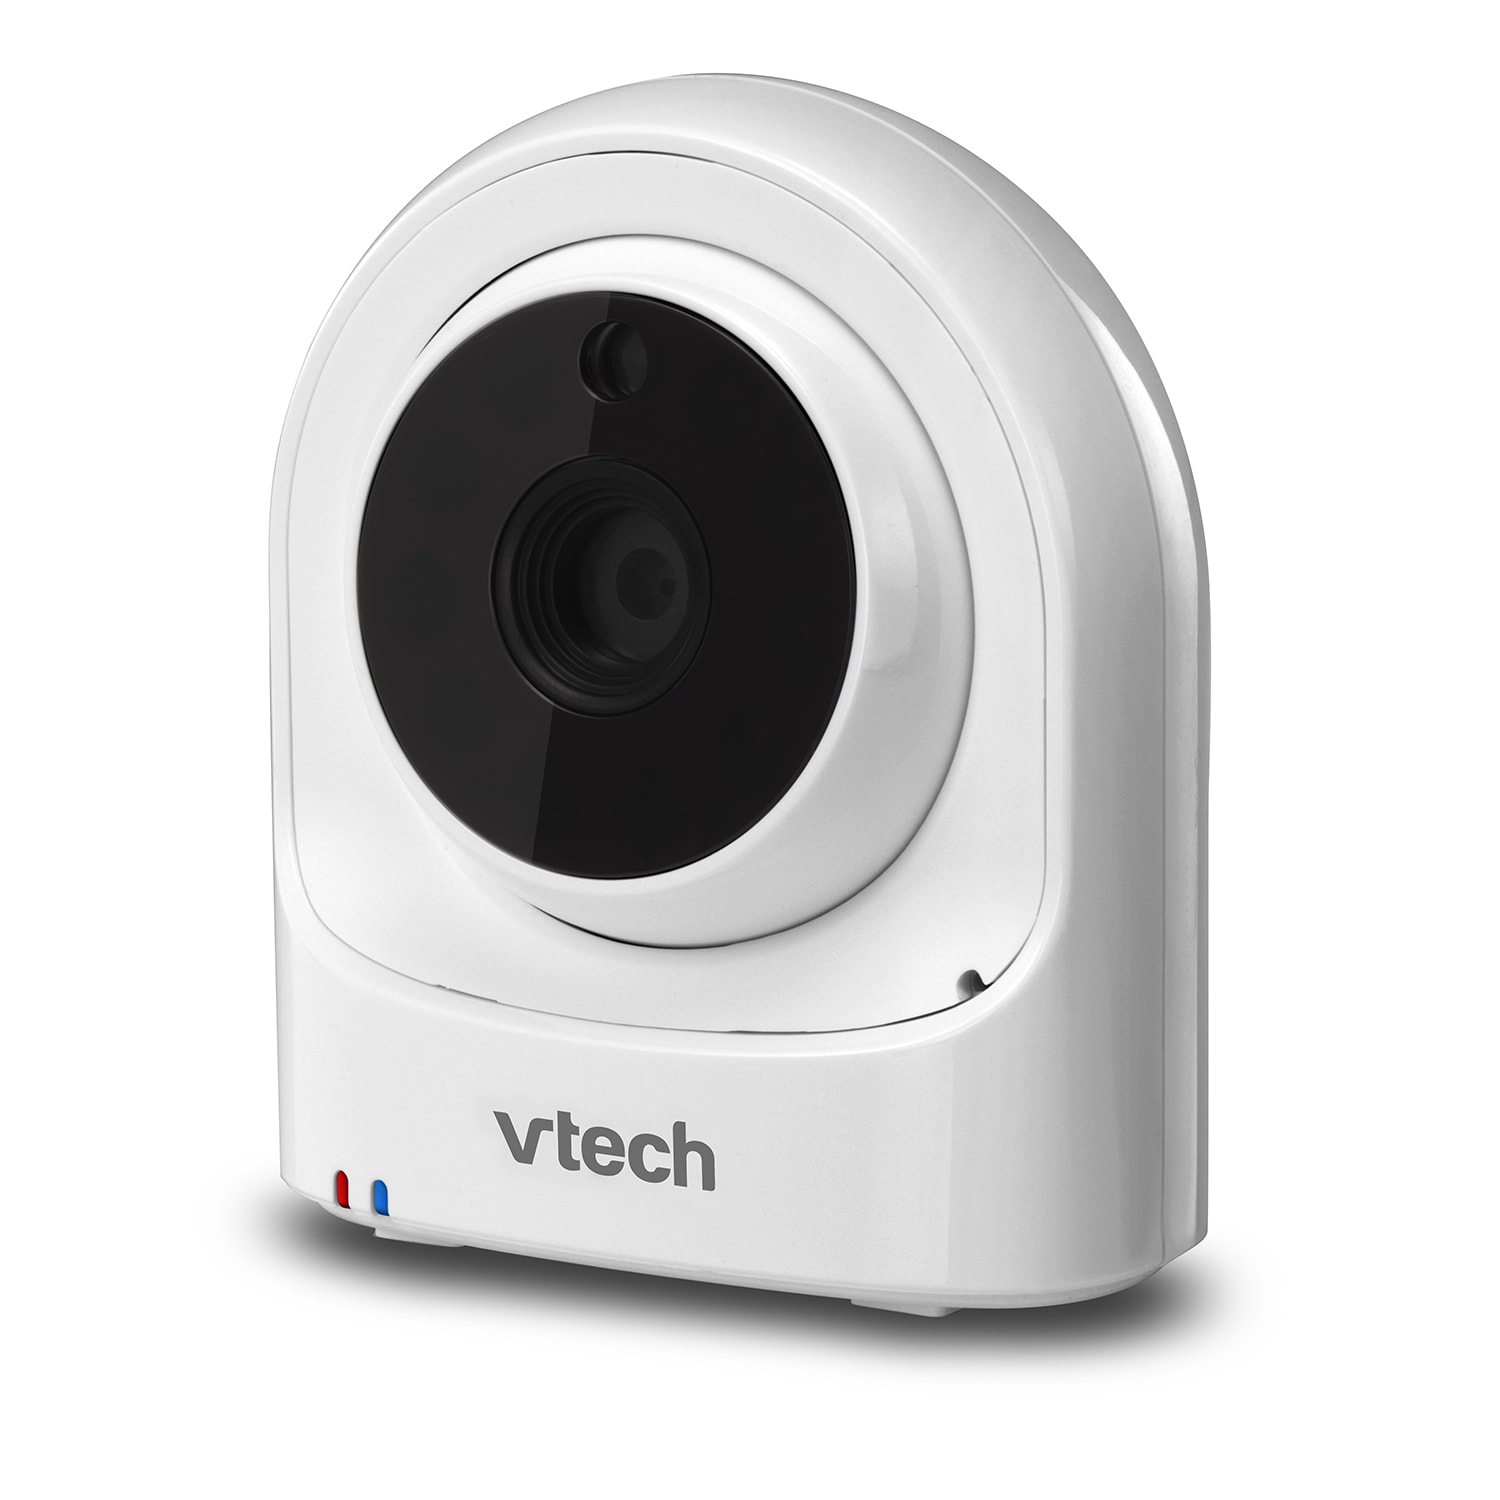 NEW VTech VM981 Wireless WiFi Baby Monitor w//Remote Access App 5in Touch Screen